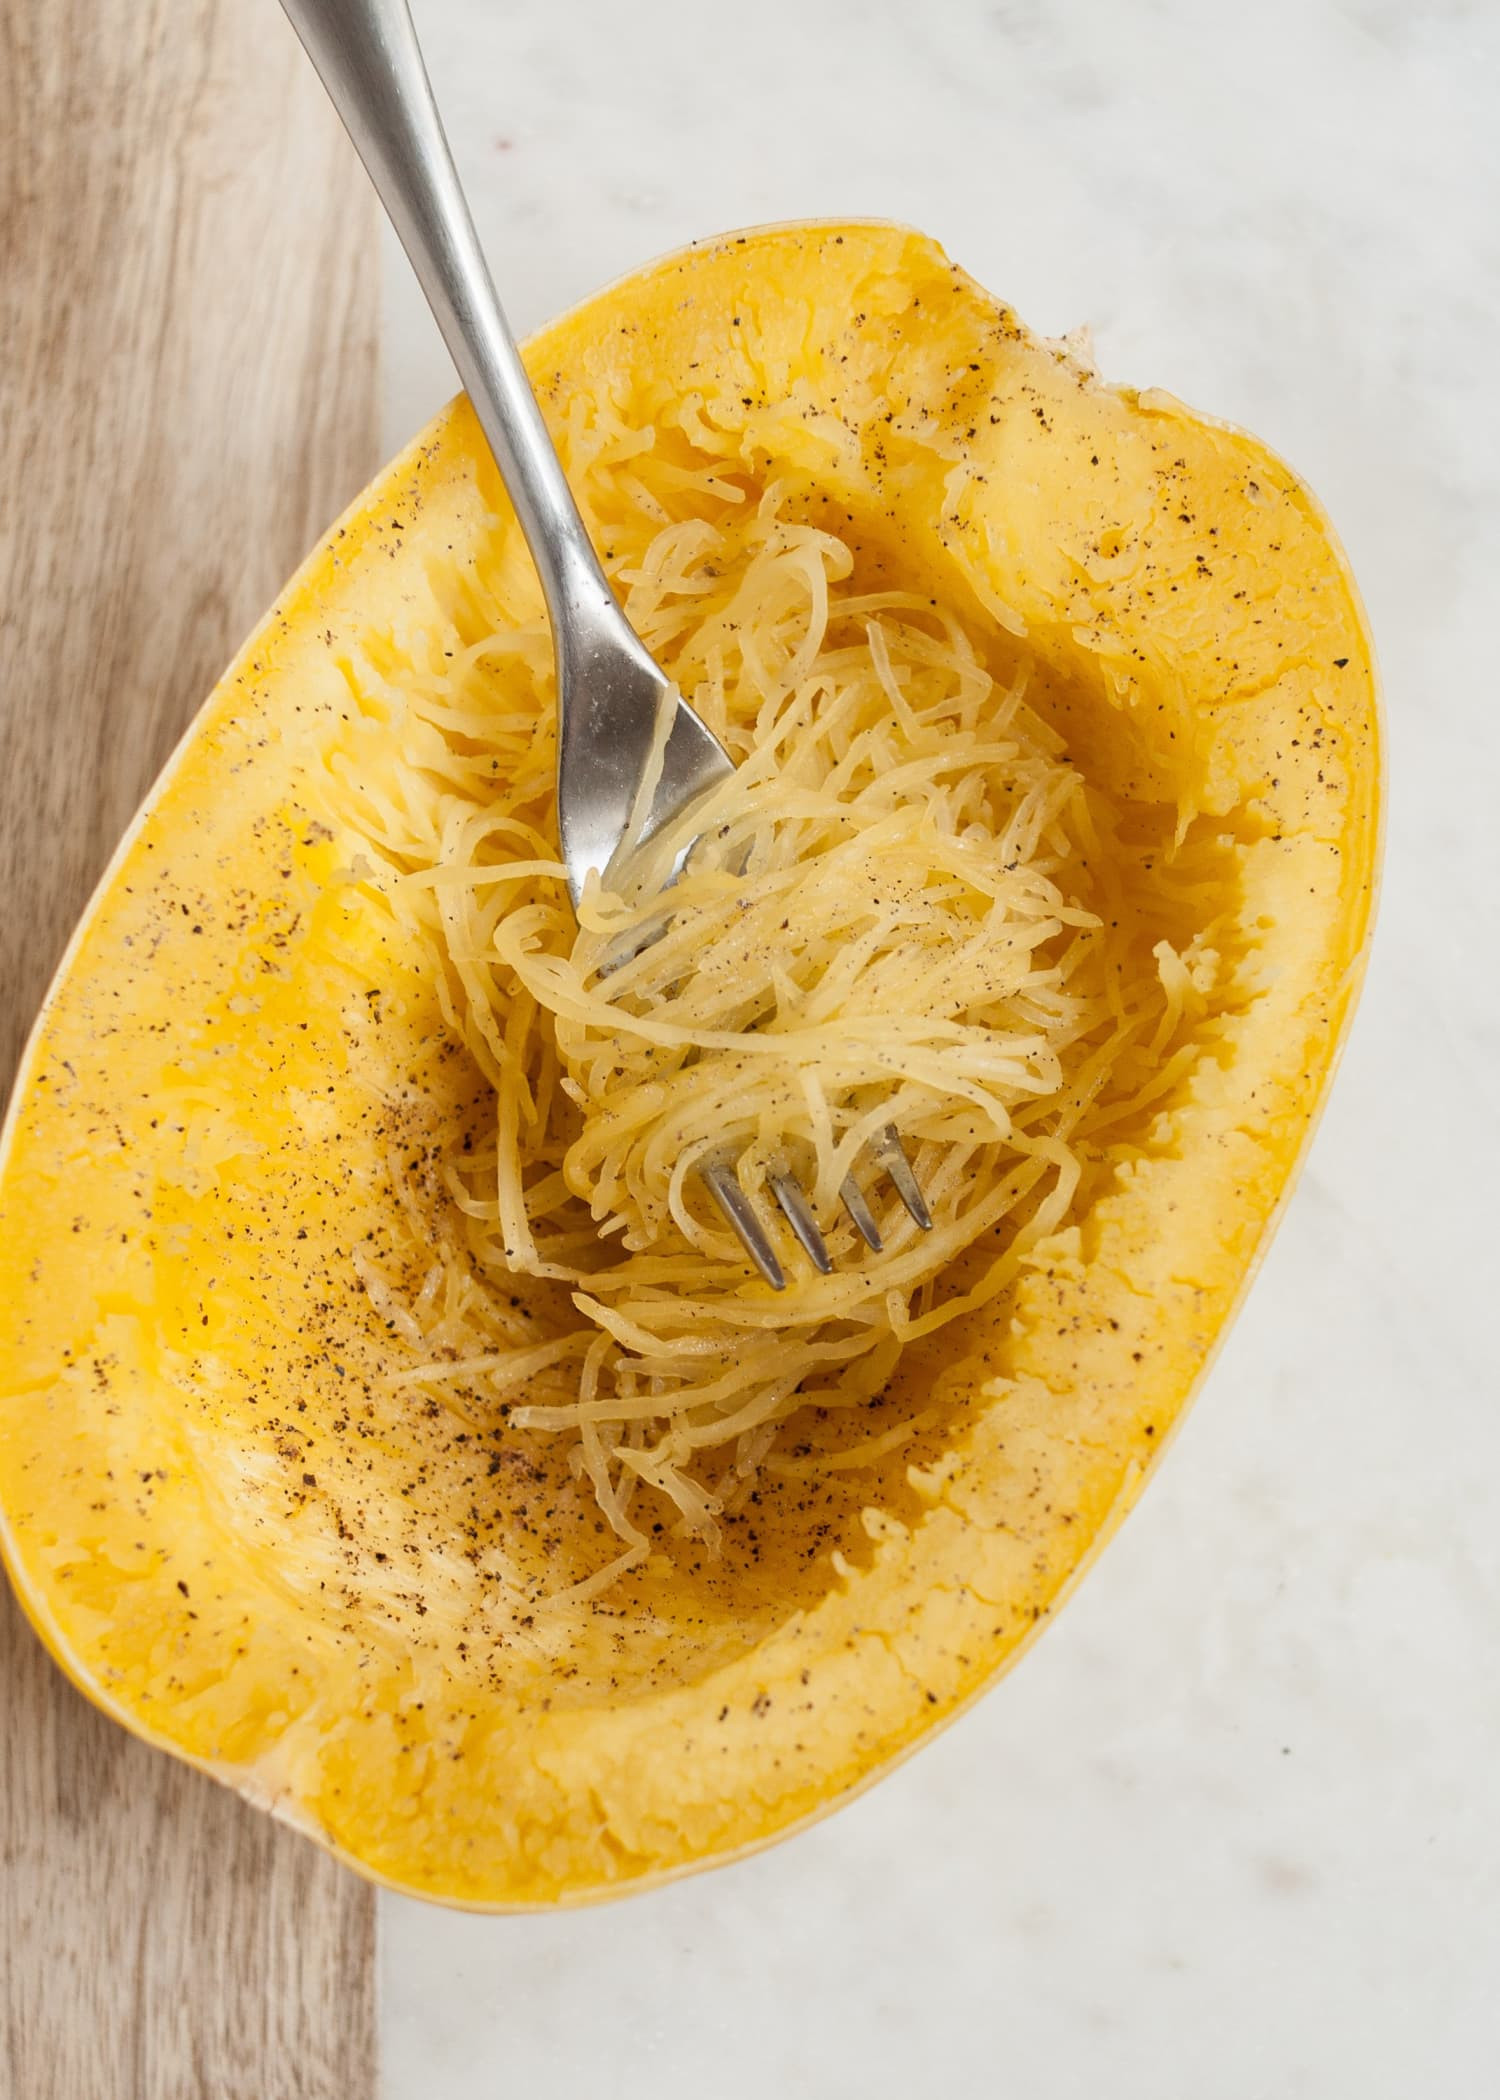 Microwave Spaghetti Squash Whole
 How To Cook Spaghetti Squash in the Microwave